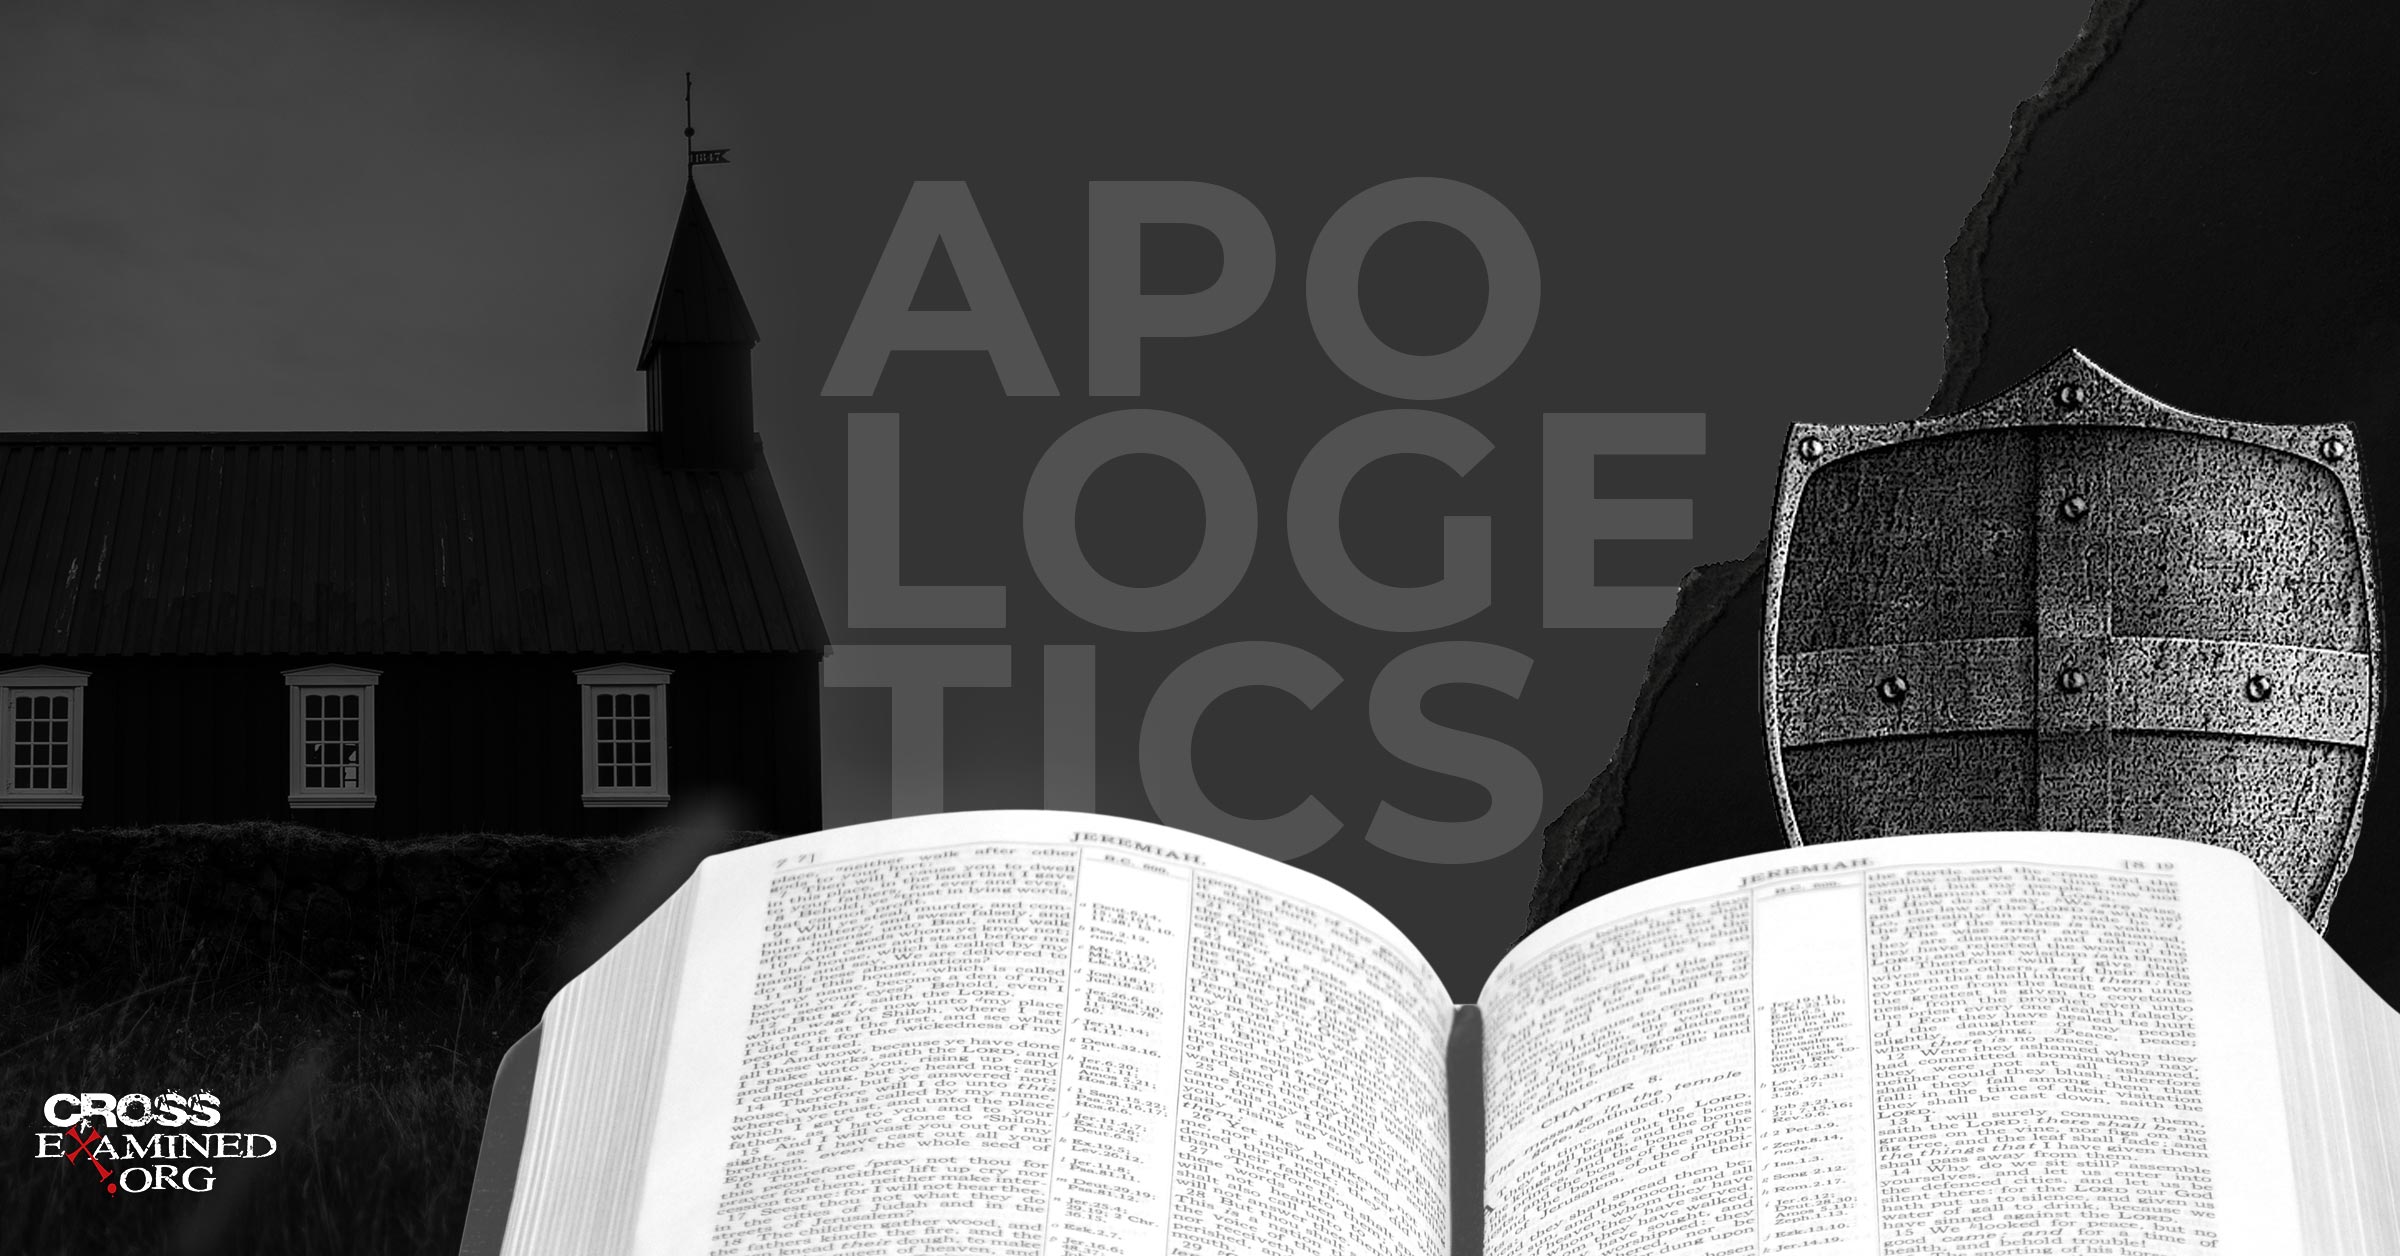 Why Does the Church Need Apologetics?